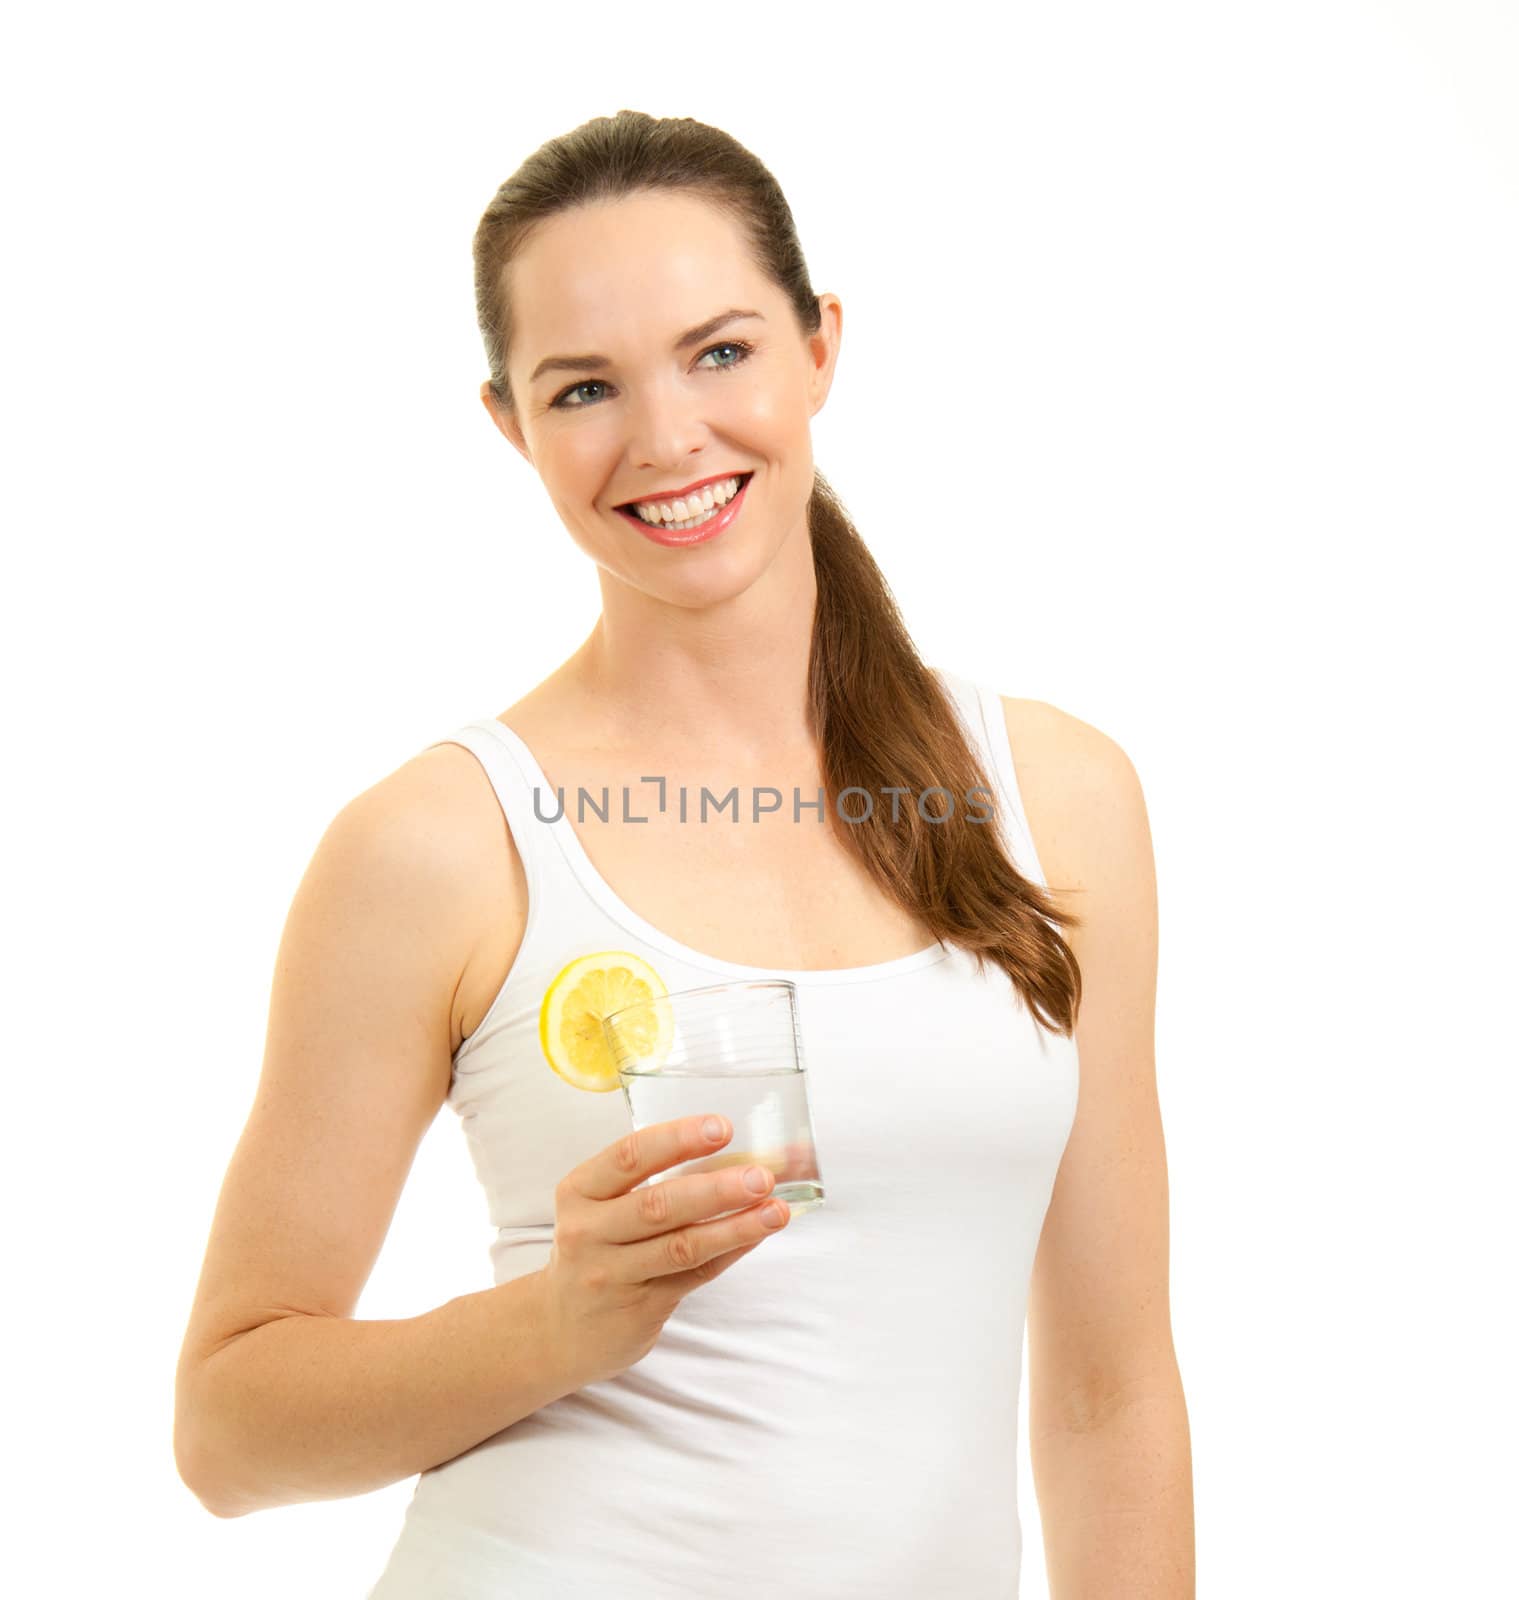 Isolated portrait of a young beautiful fresh woman holding a glass of water with slice of lemon.